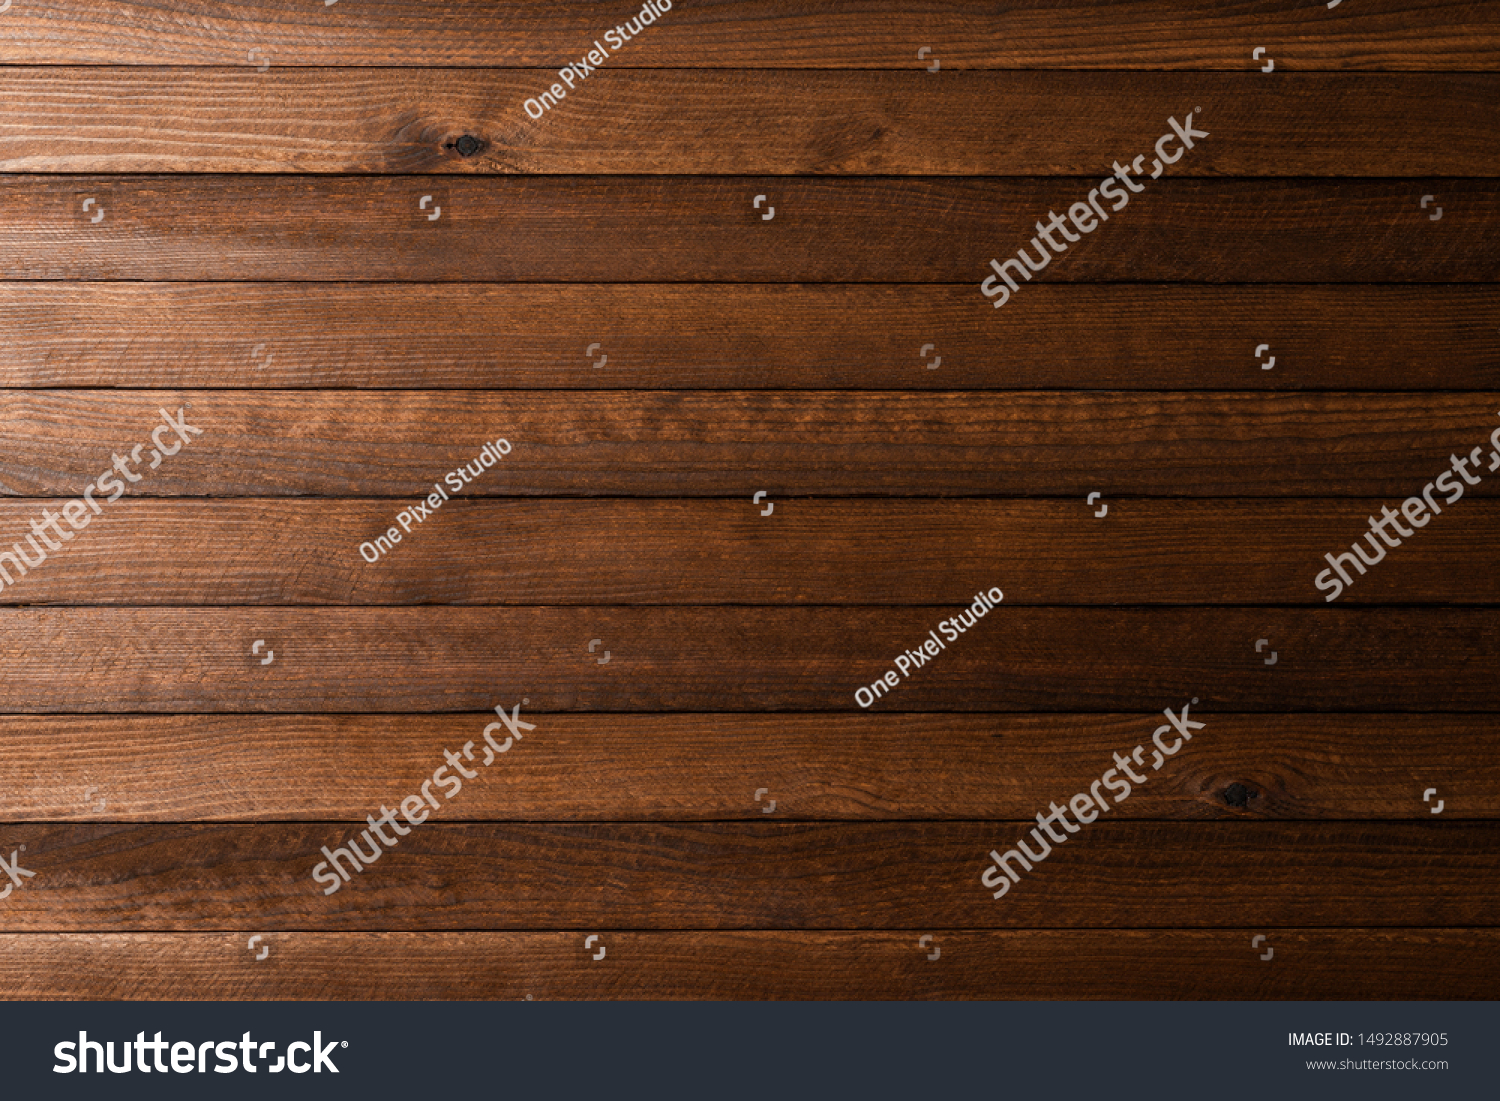 Wooden texture or background. Close up #1492887905